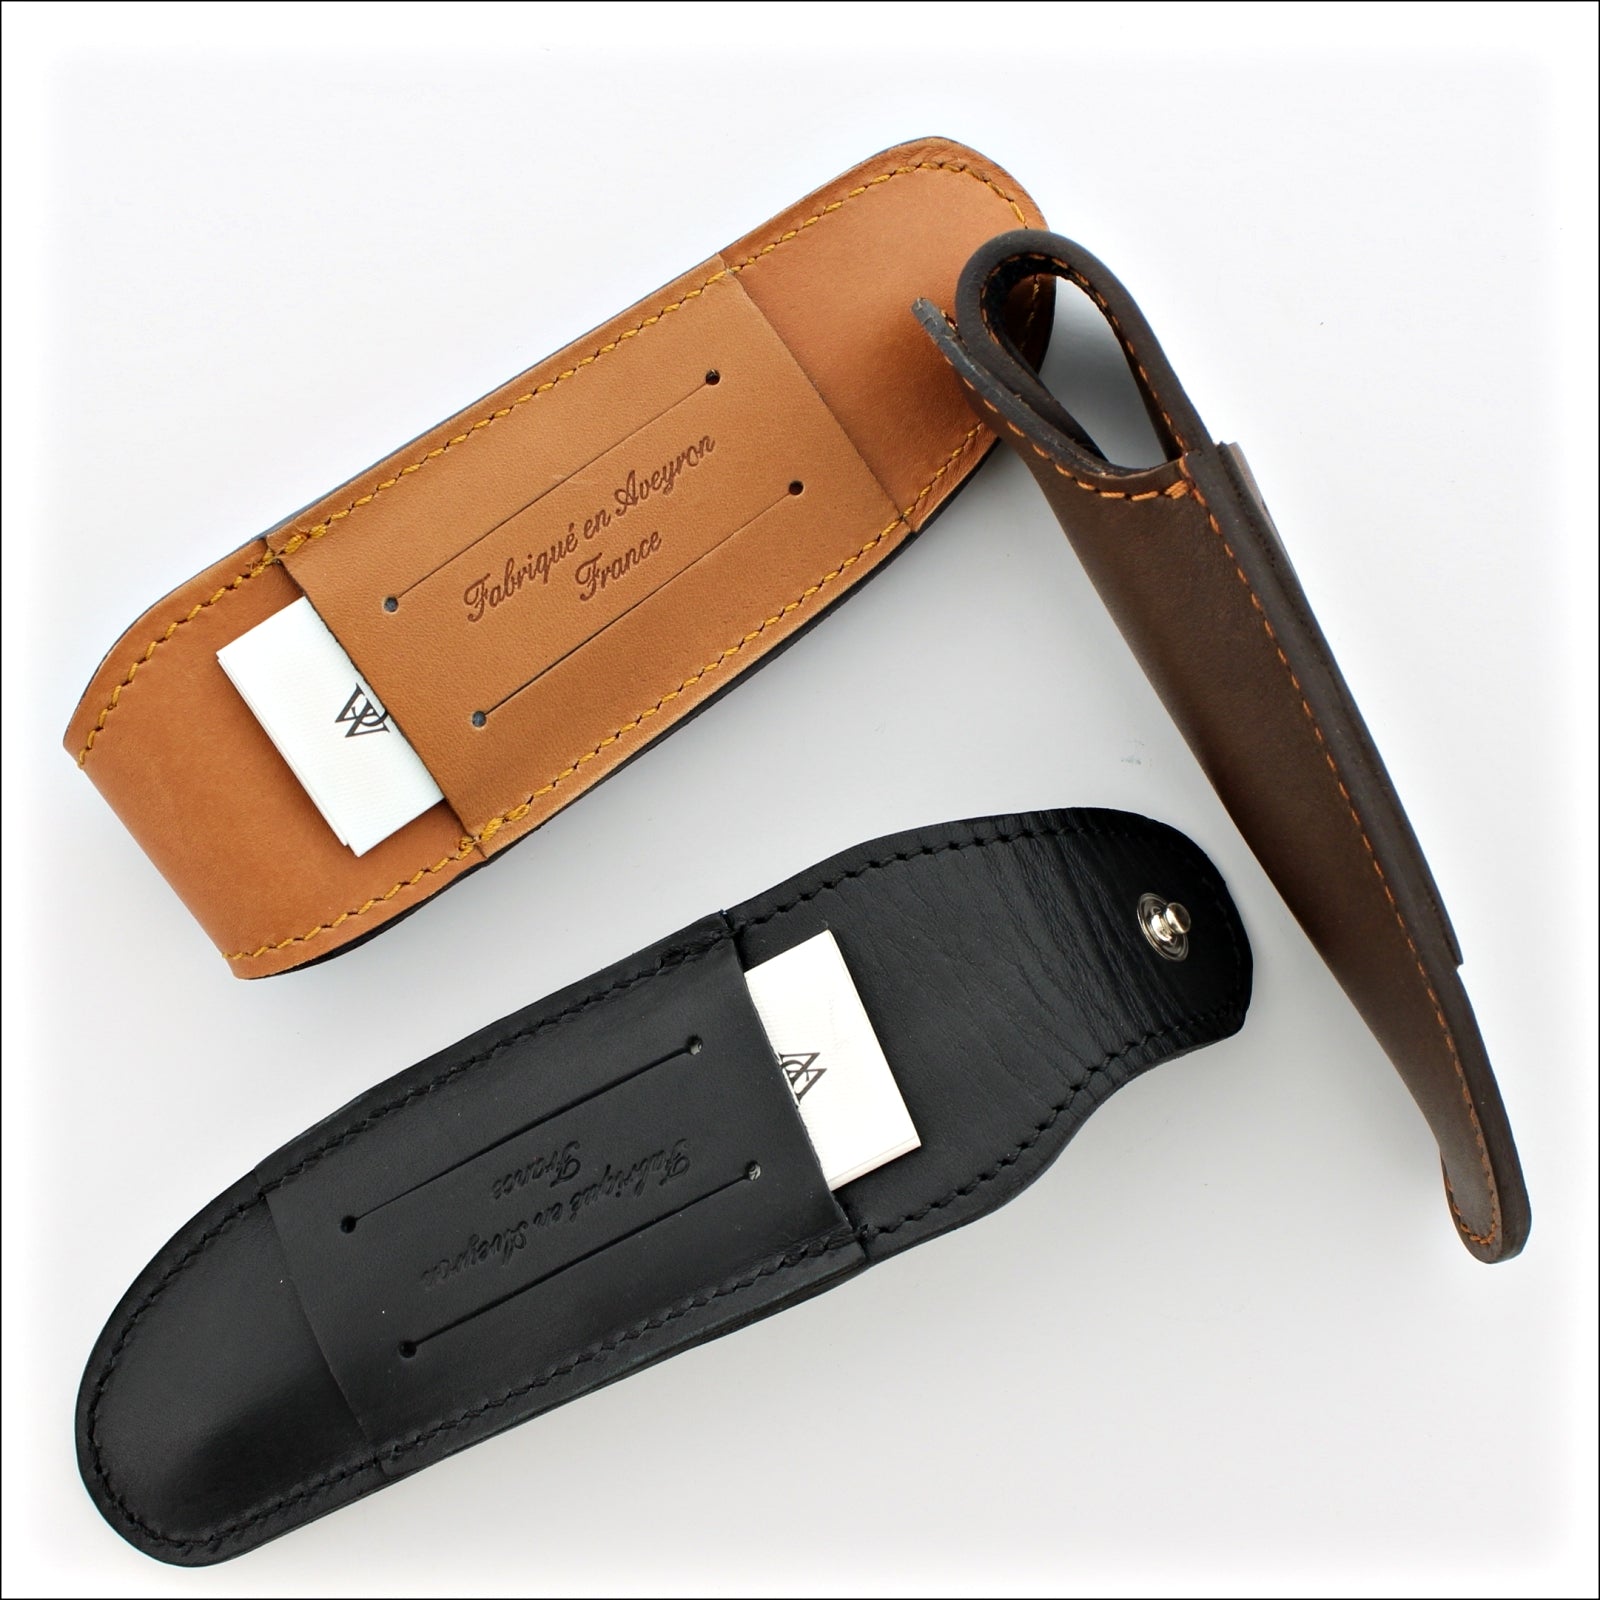 Class Leather Knife Sheath for 11 to 13 cm Pocket Knives